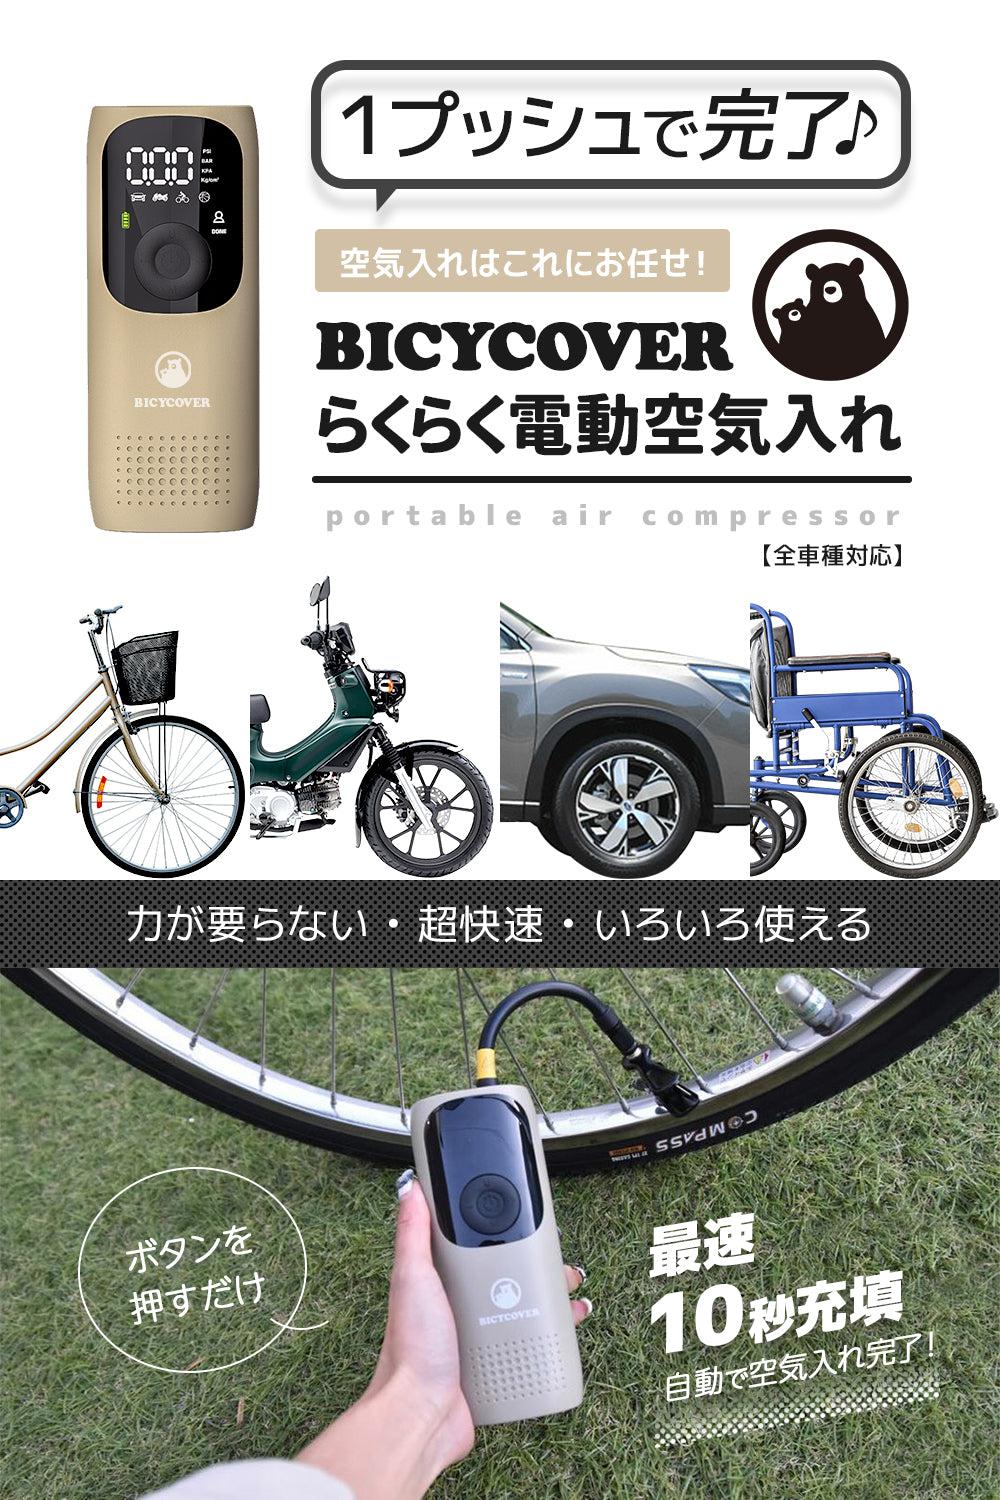 BICYCOVER らくらく電動空気入れ - BICYCOVER